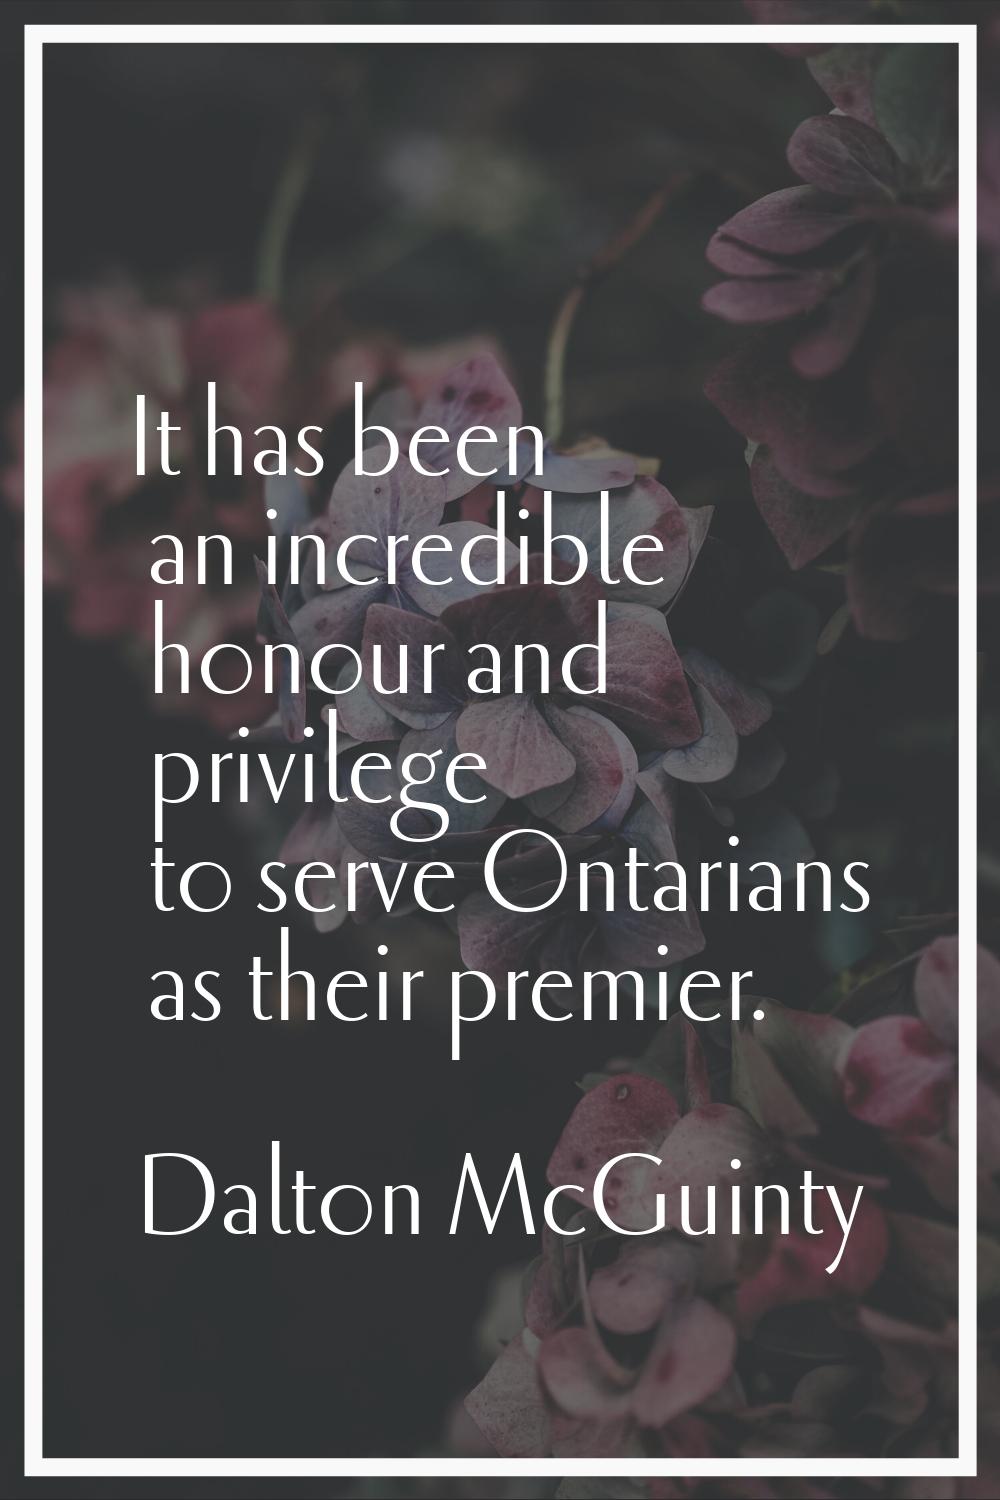 It has been an incredible honour and privilege to serve Ontarians as their premier.